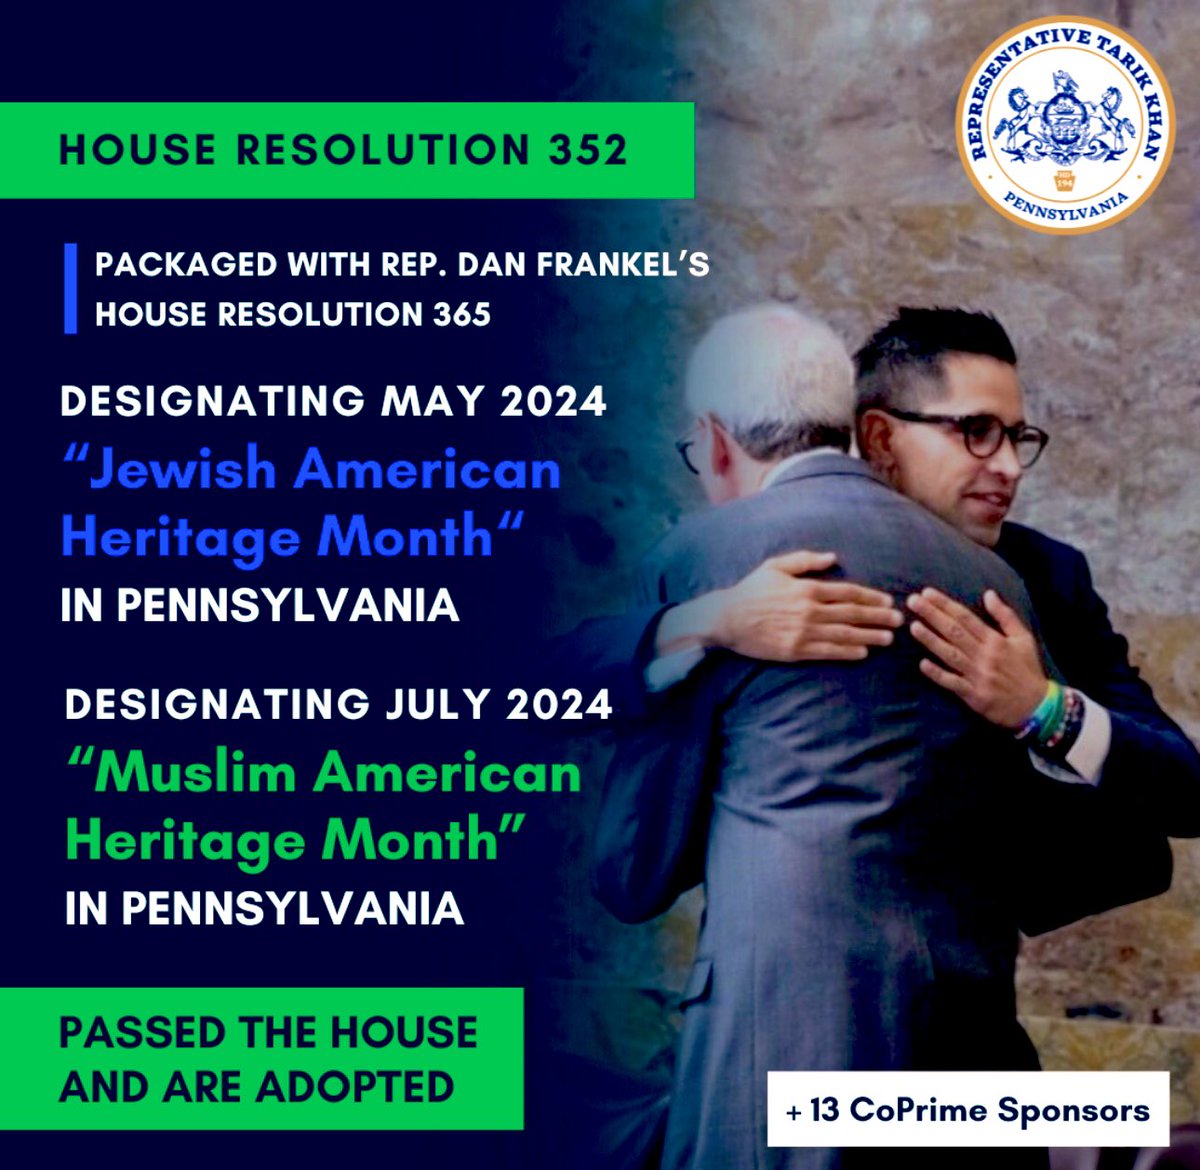 A beautiful moment in the PA house!! Our chamber passed and adopted a package of two resolutions: “May 2024 as Jewish American Heritage Month in PA” and “July 2024 as Muslim American Heritage Month.” So great to embrace moments that bring our communities closer together.